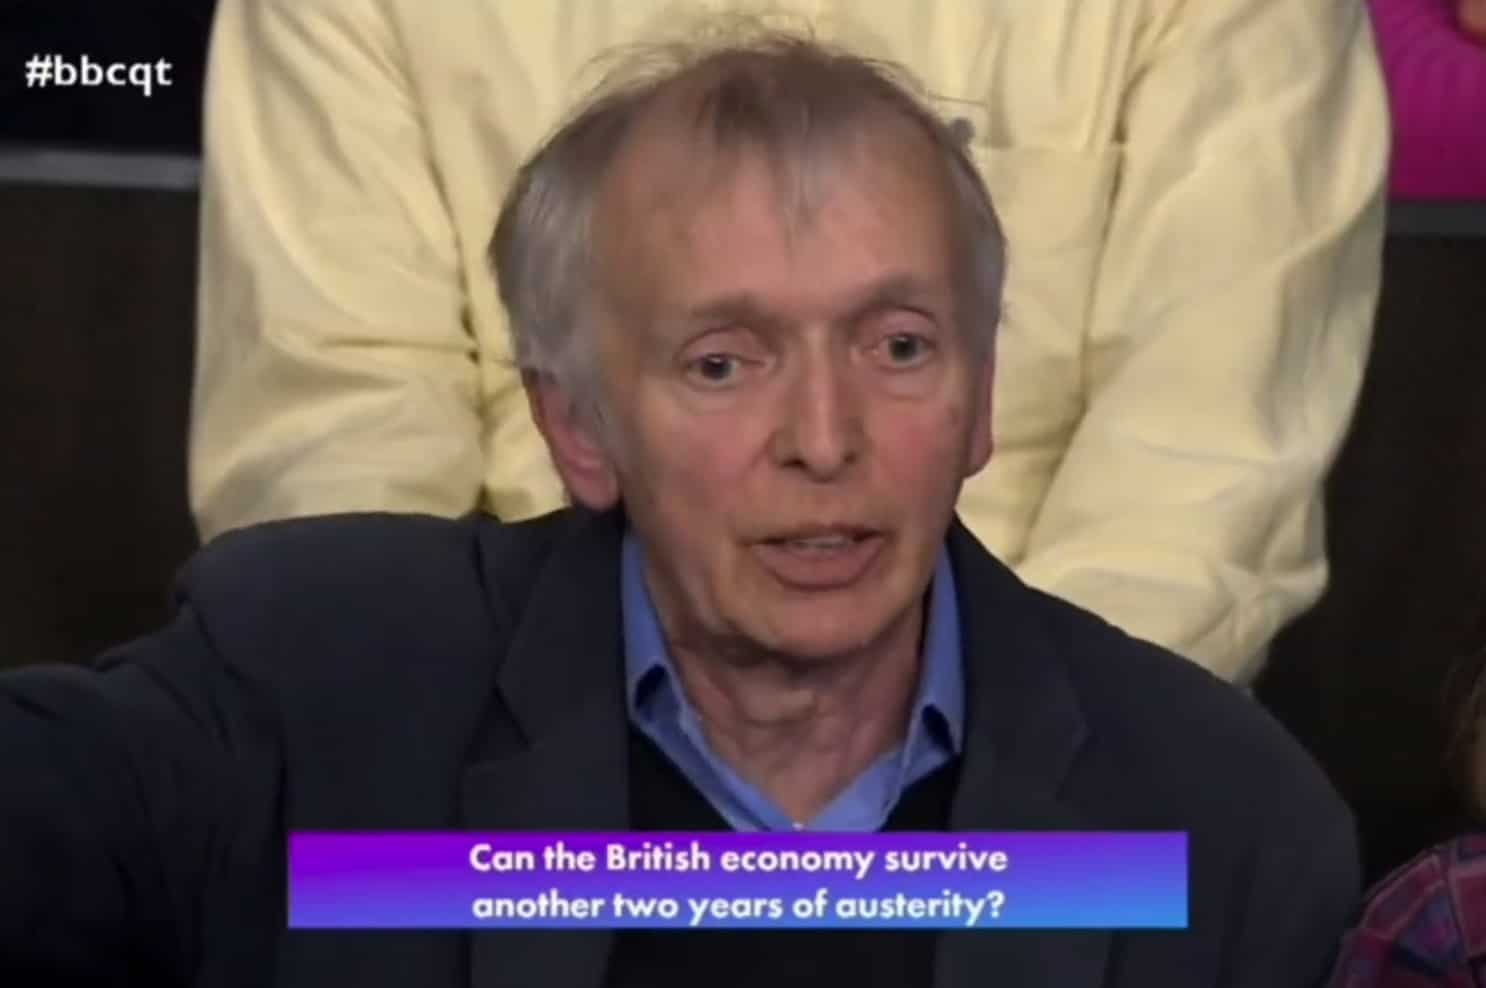 ‘Brexit is a factor and the two main parties aren’t talking about it’ – BBC QT audience member lets rip